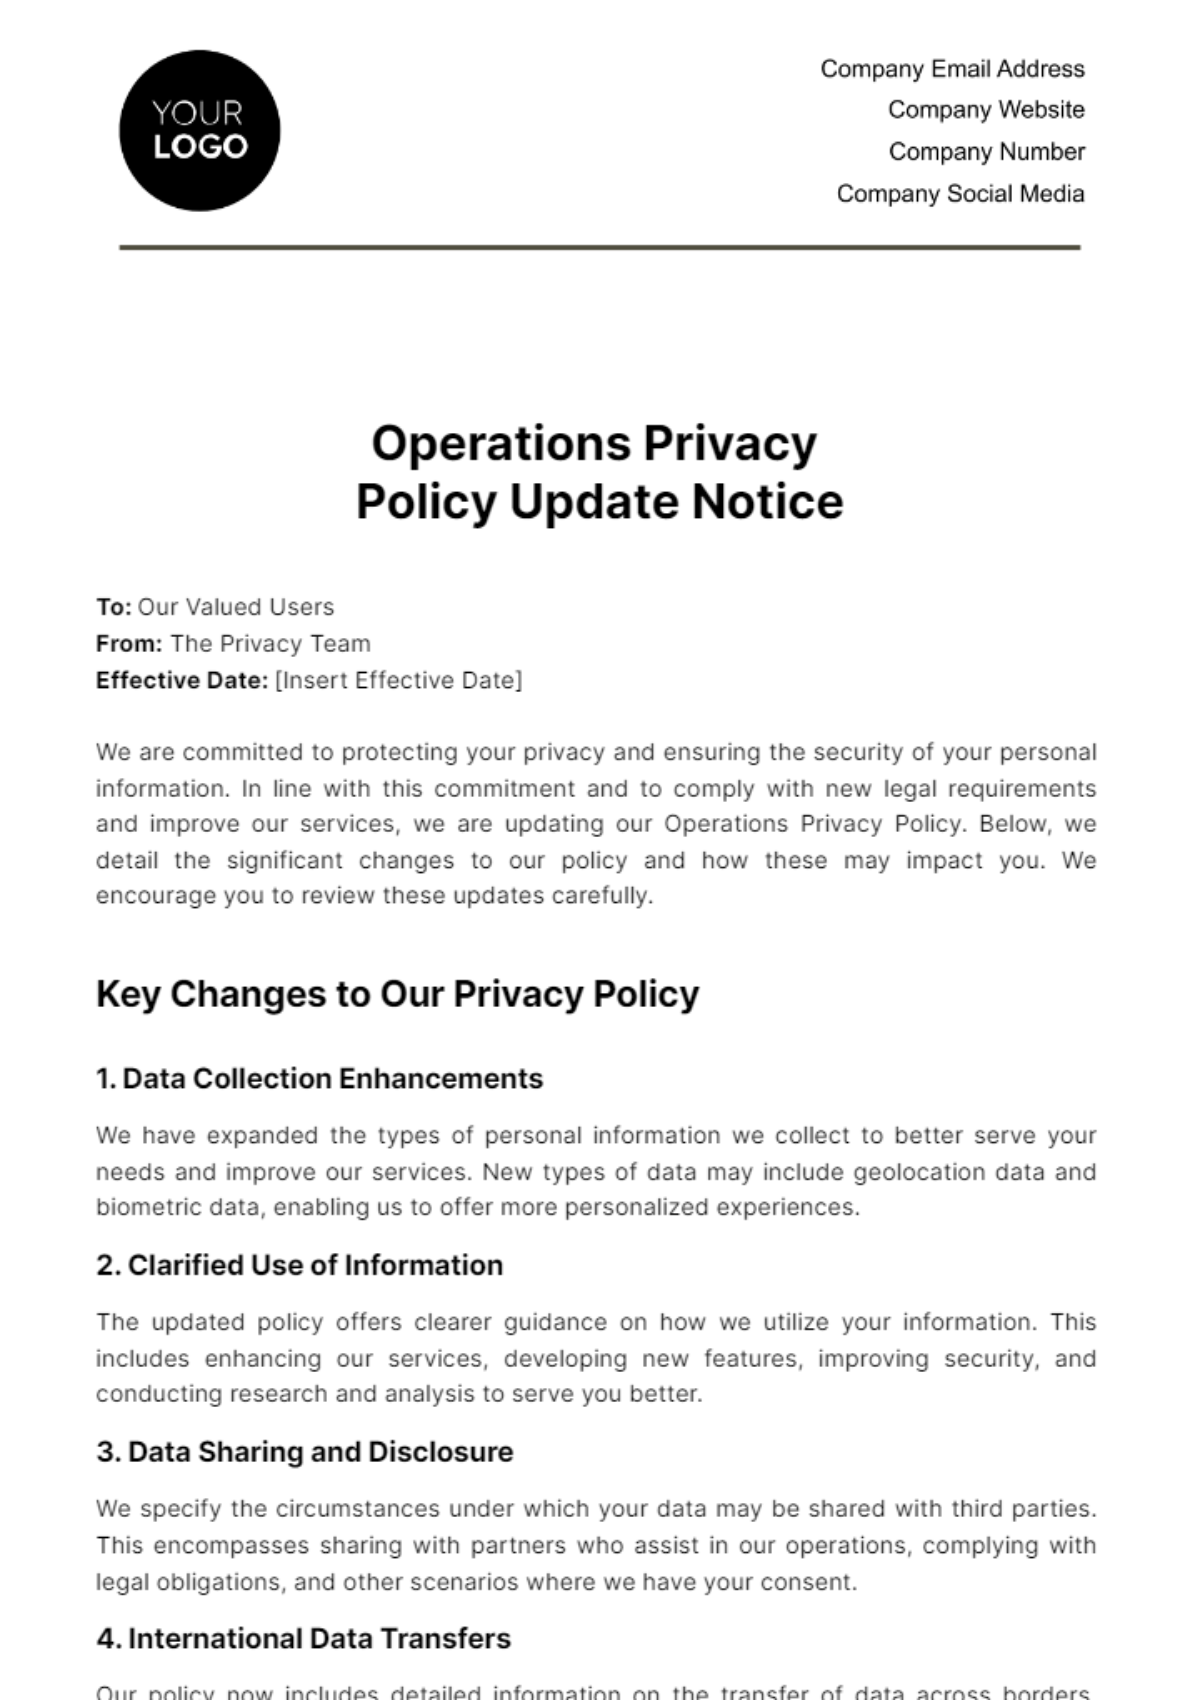 Free Operations Privacy Policy Update Notice Template